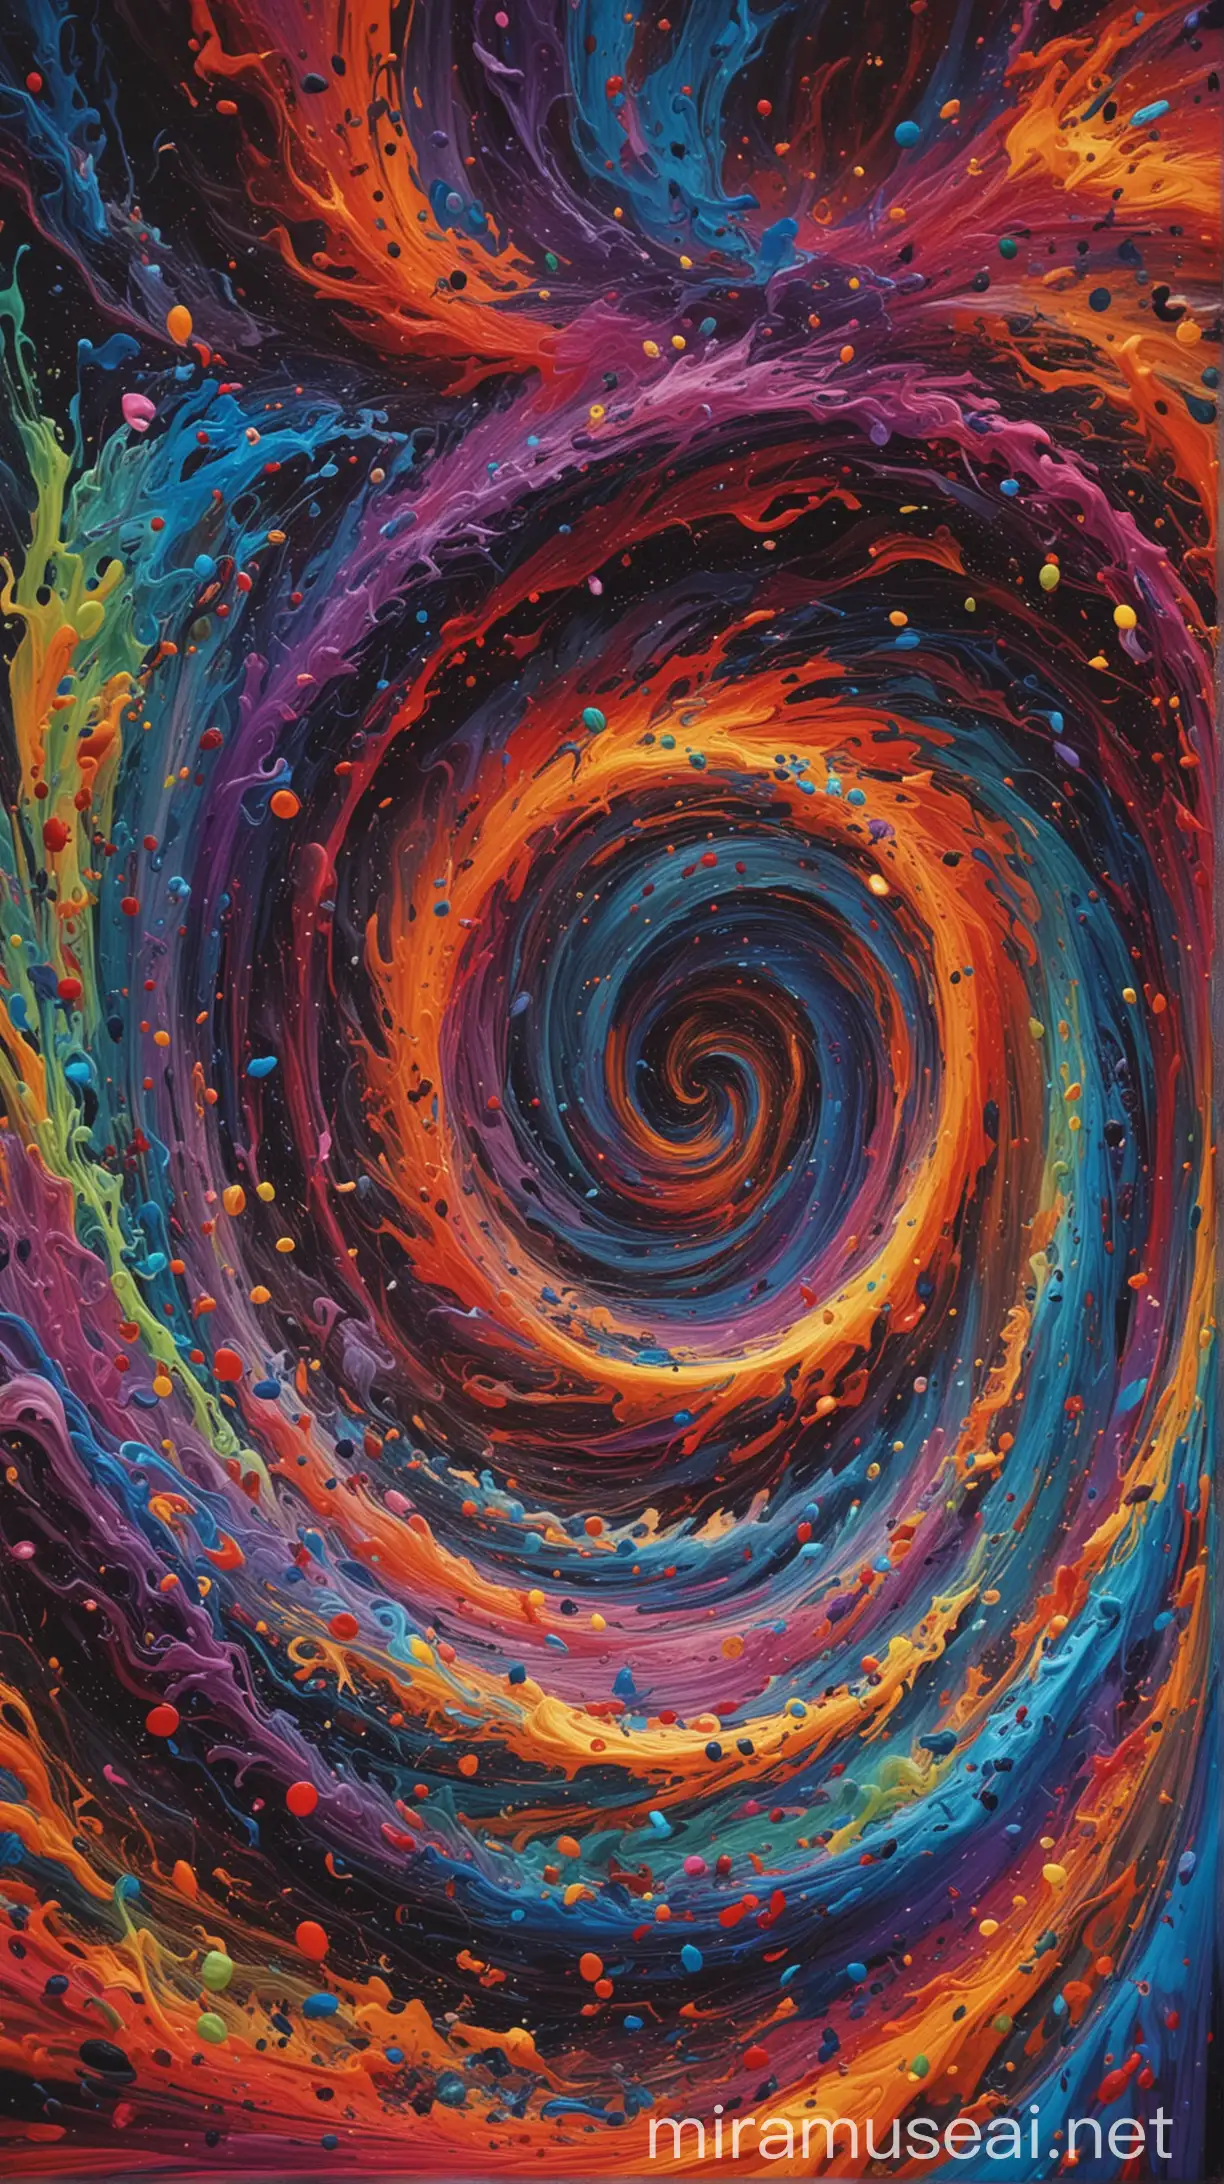 Colorful Swirling Vortex Illustrating Chaos and Void